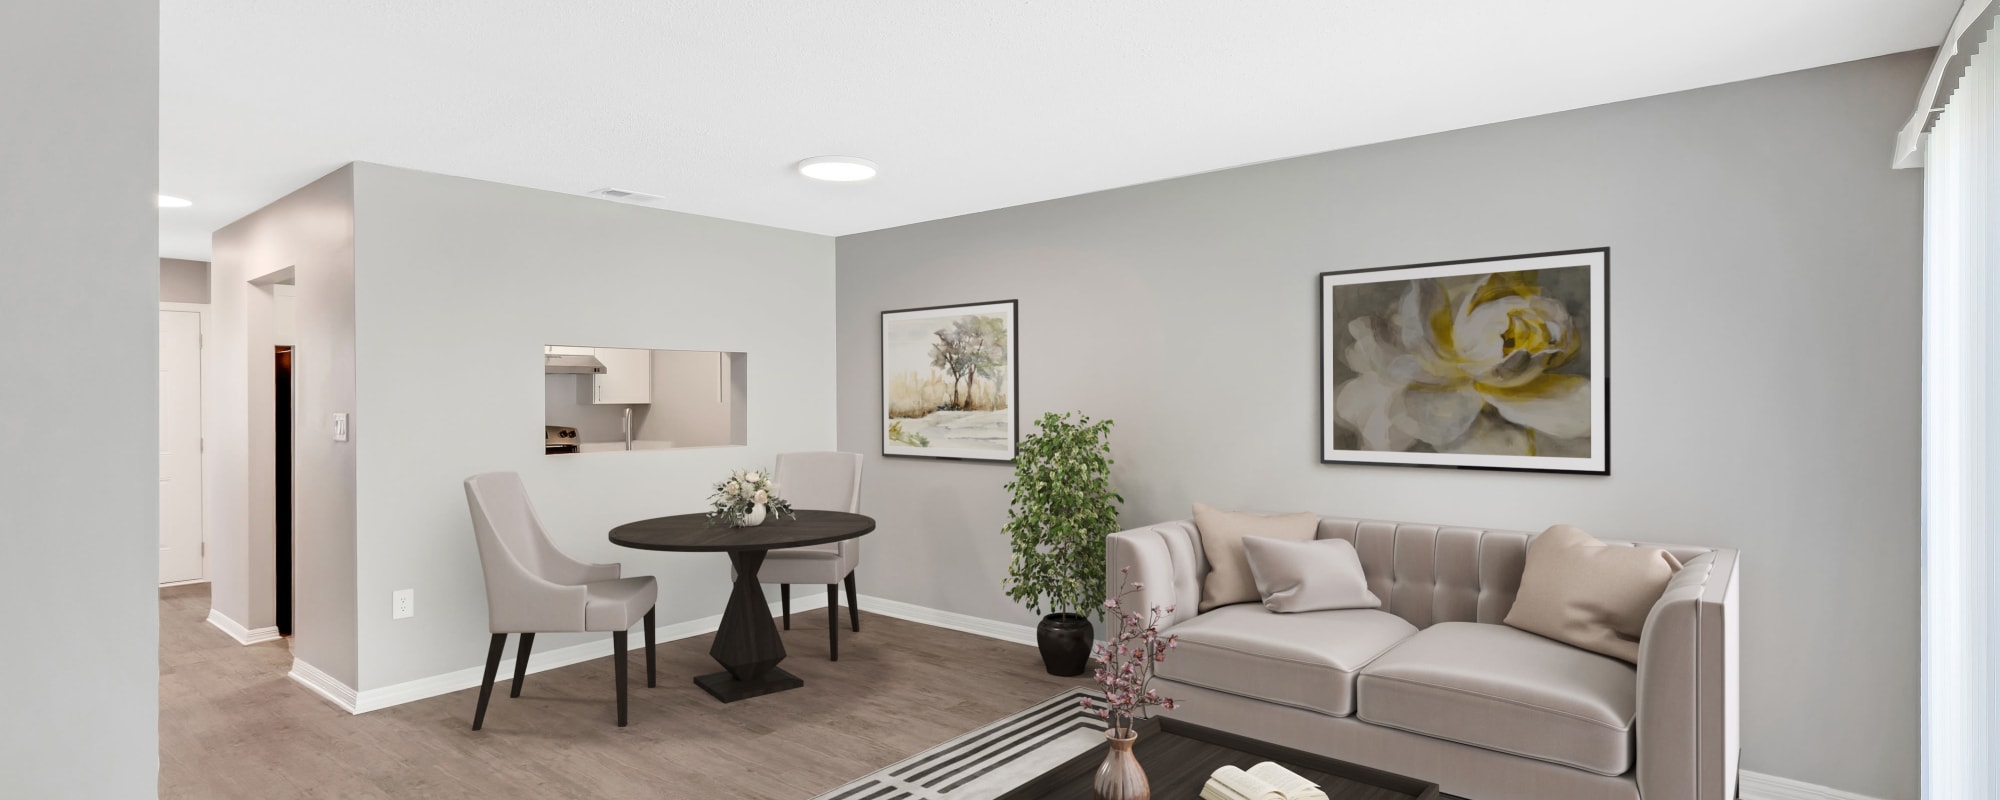 A render of a model home's living room at The Cordelia in Fort Walton Beach, Florida